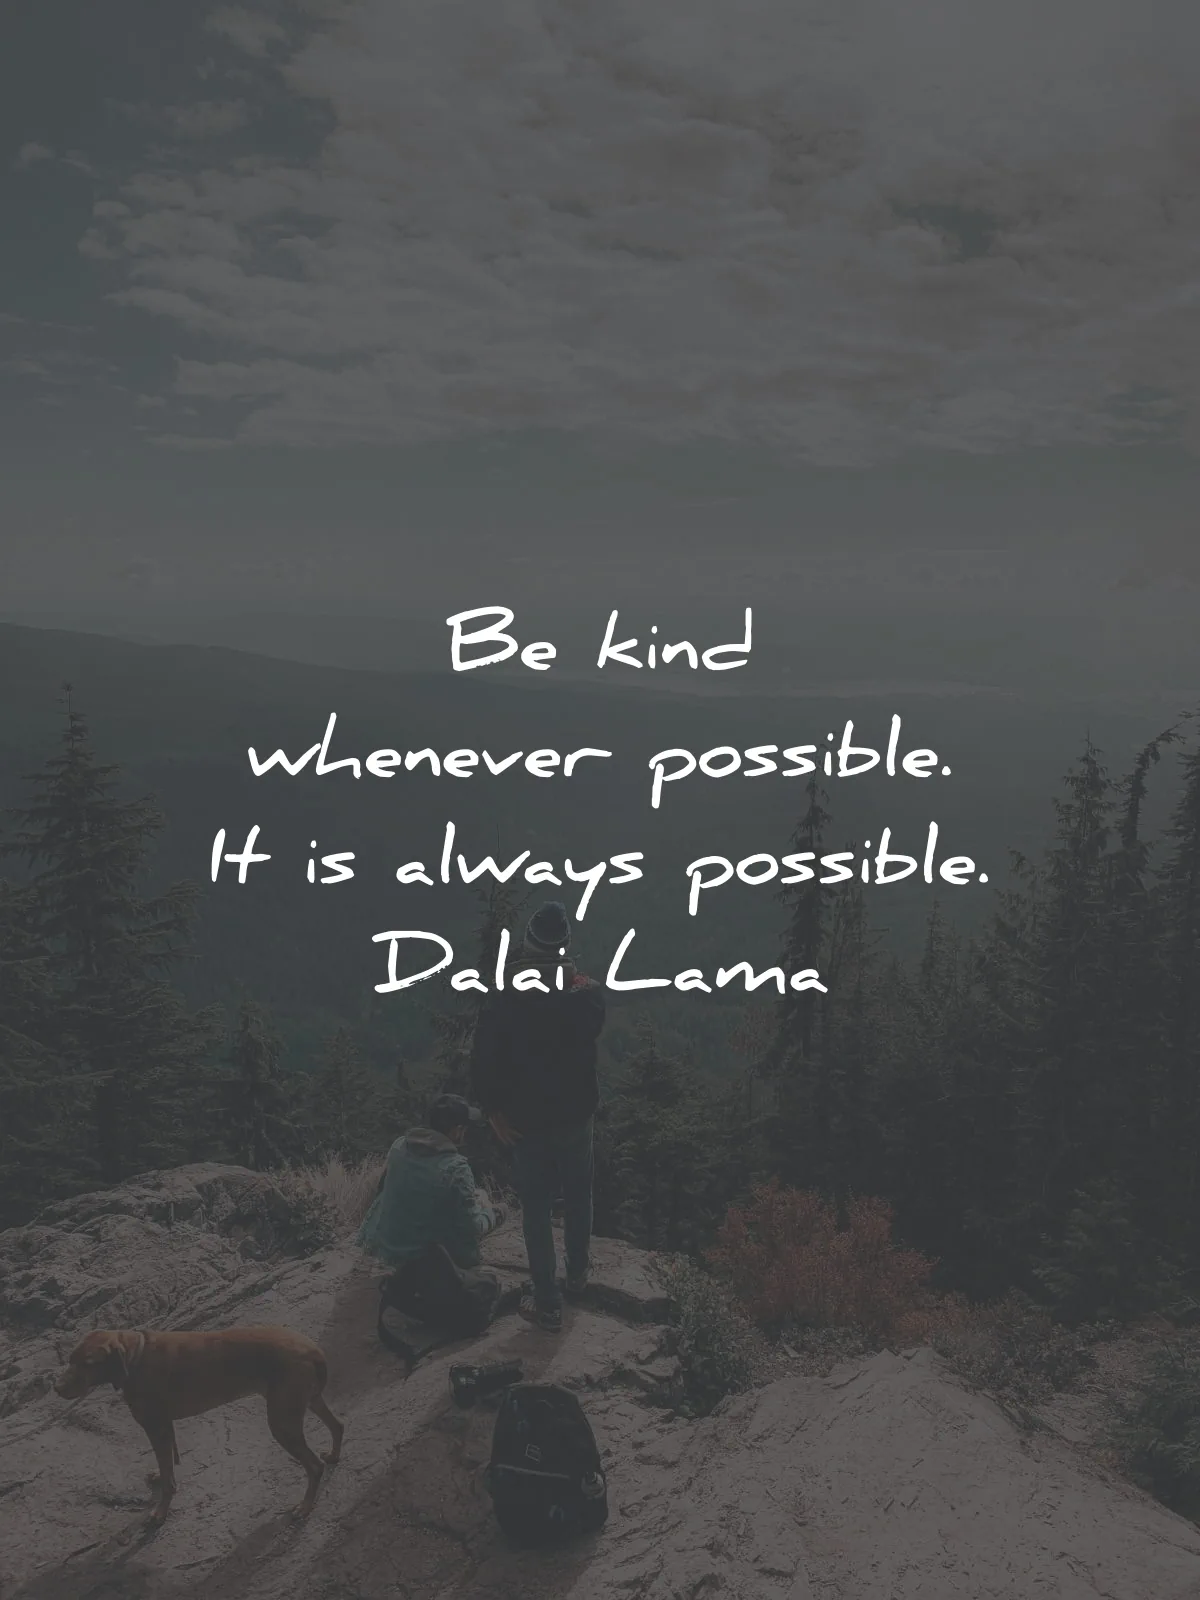 famous quotes kind whenever possible always dalai lama wisdom